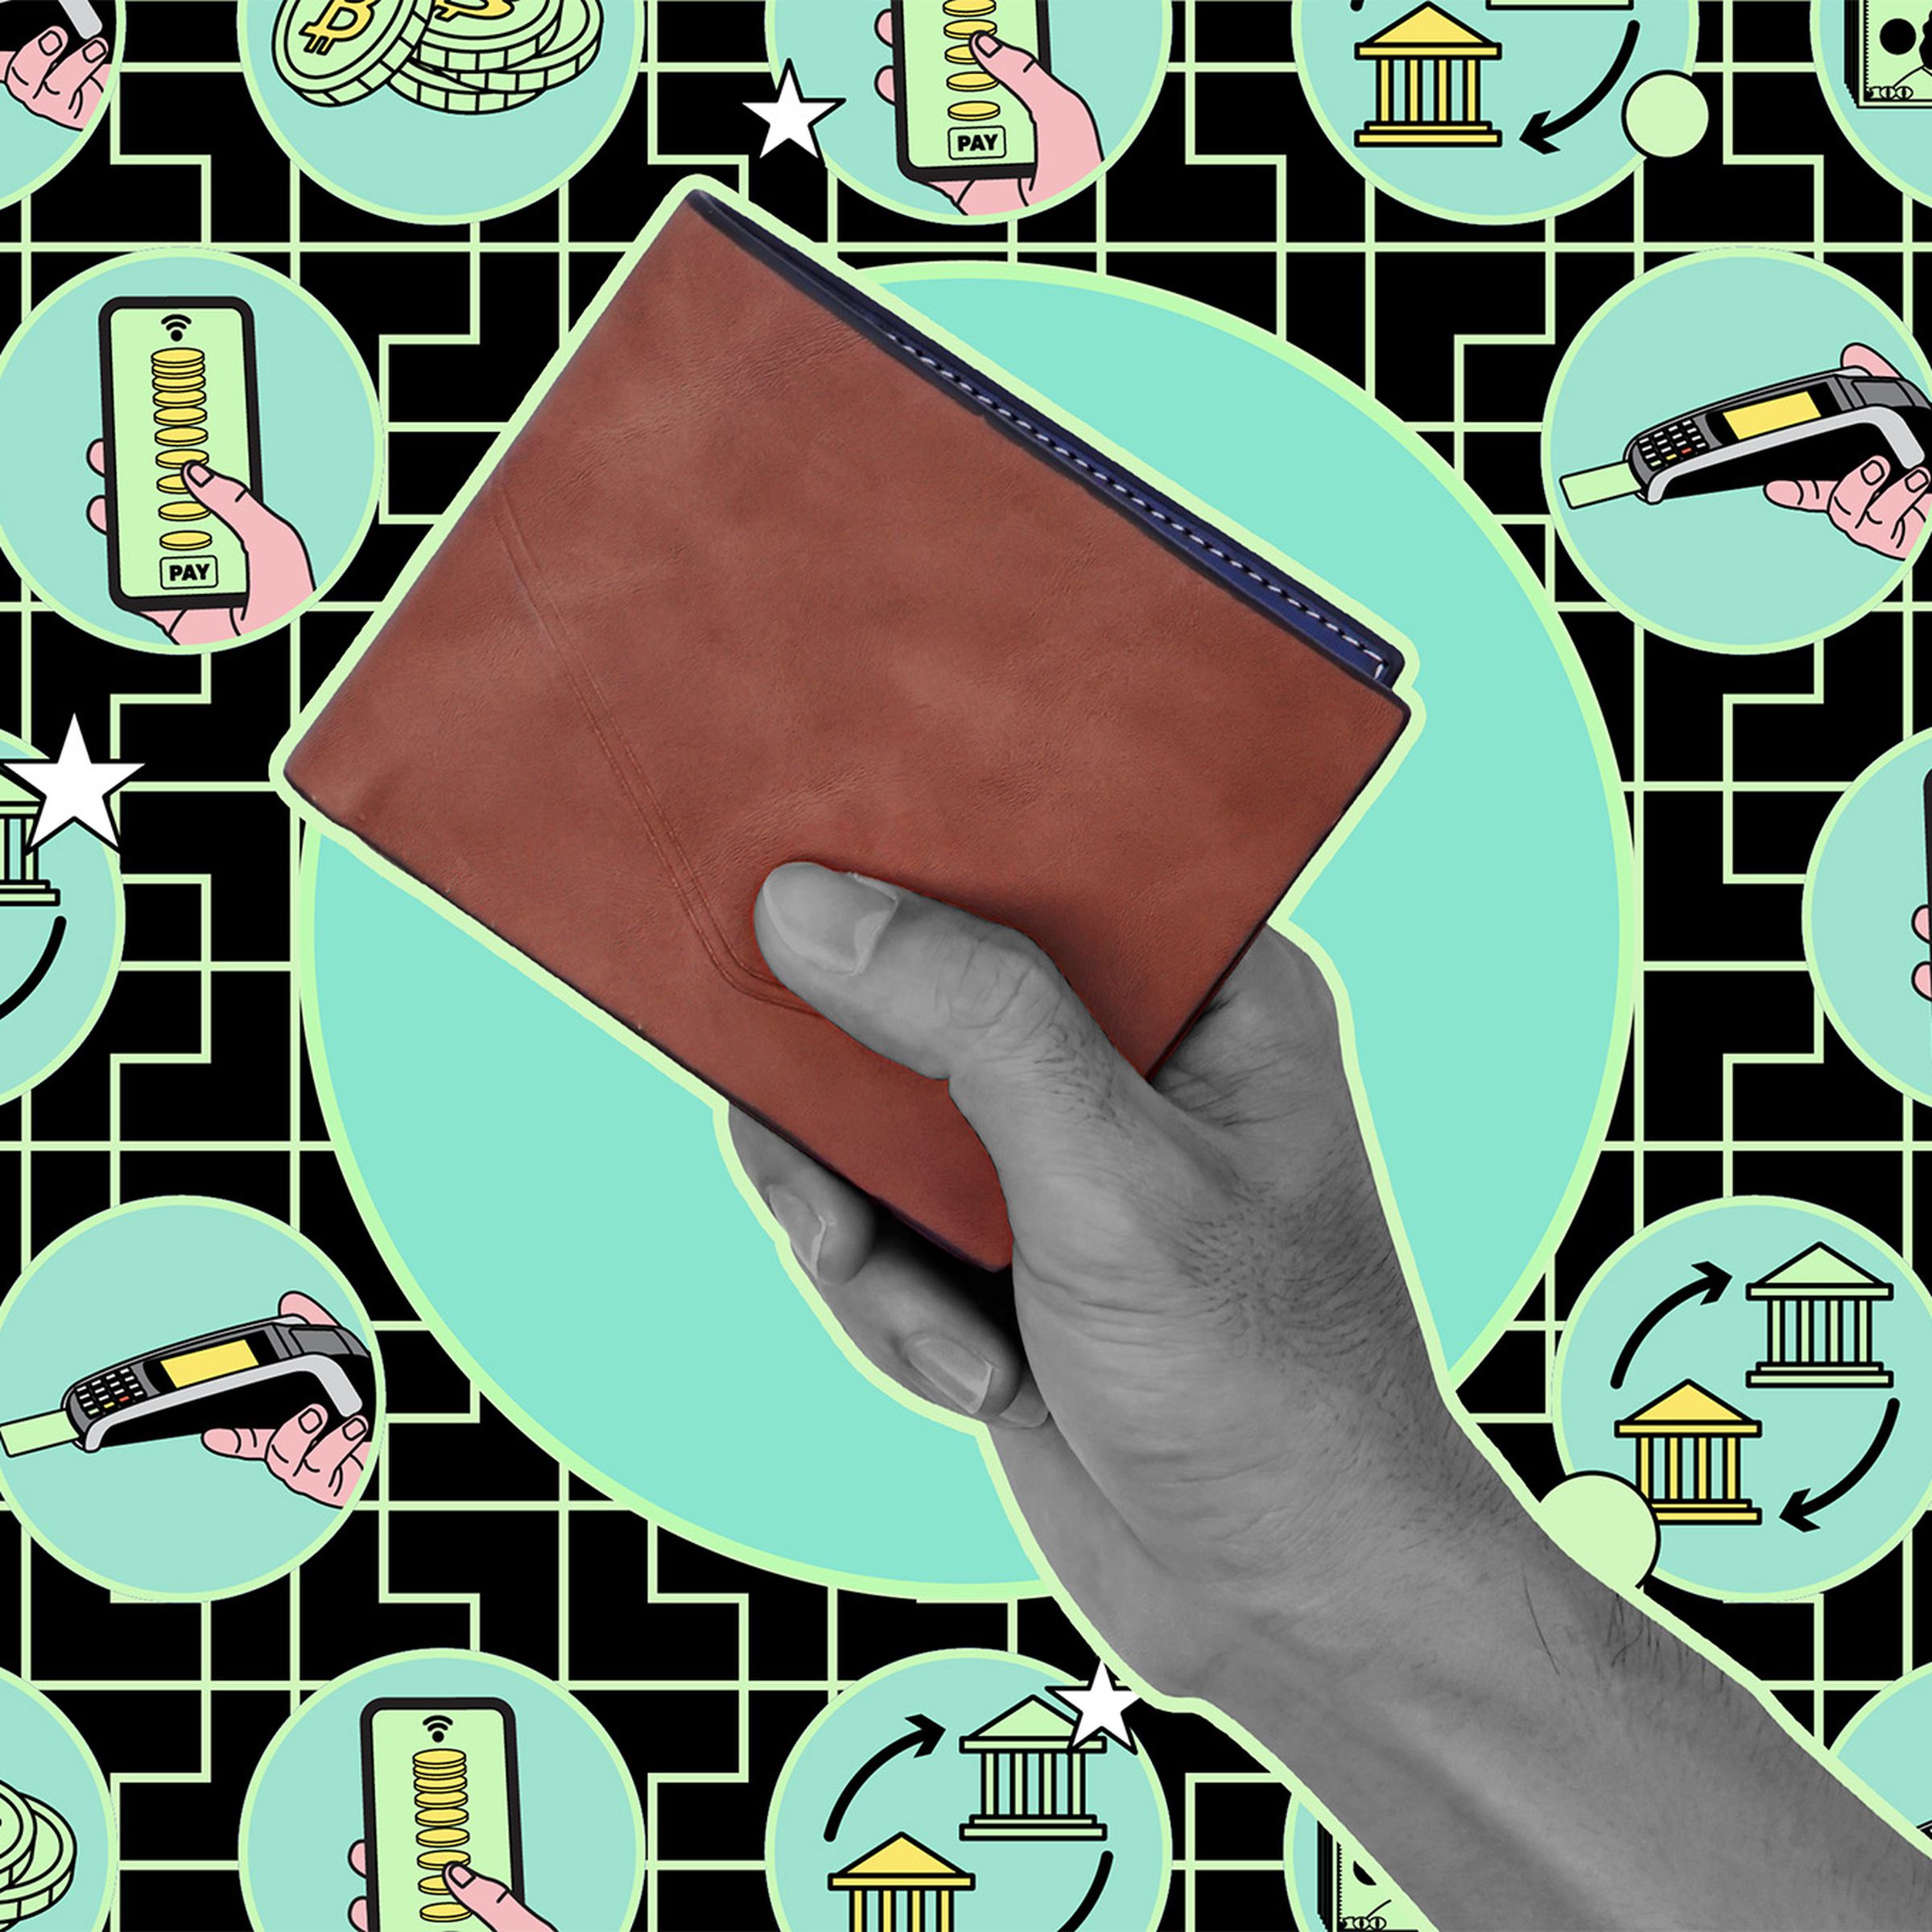 An illustration of a hand holding up a wallet in front of a blue background filled with money-related icons.